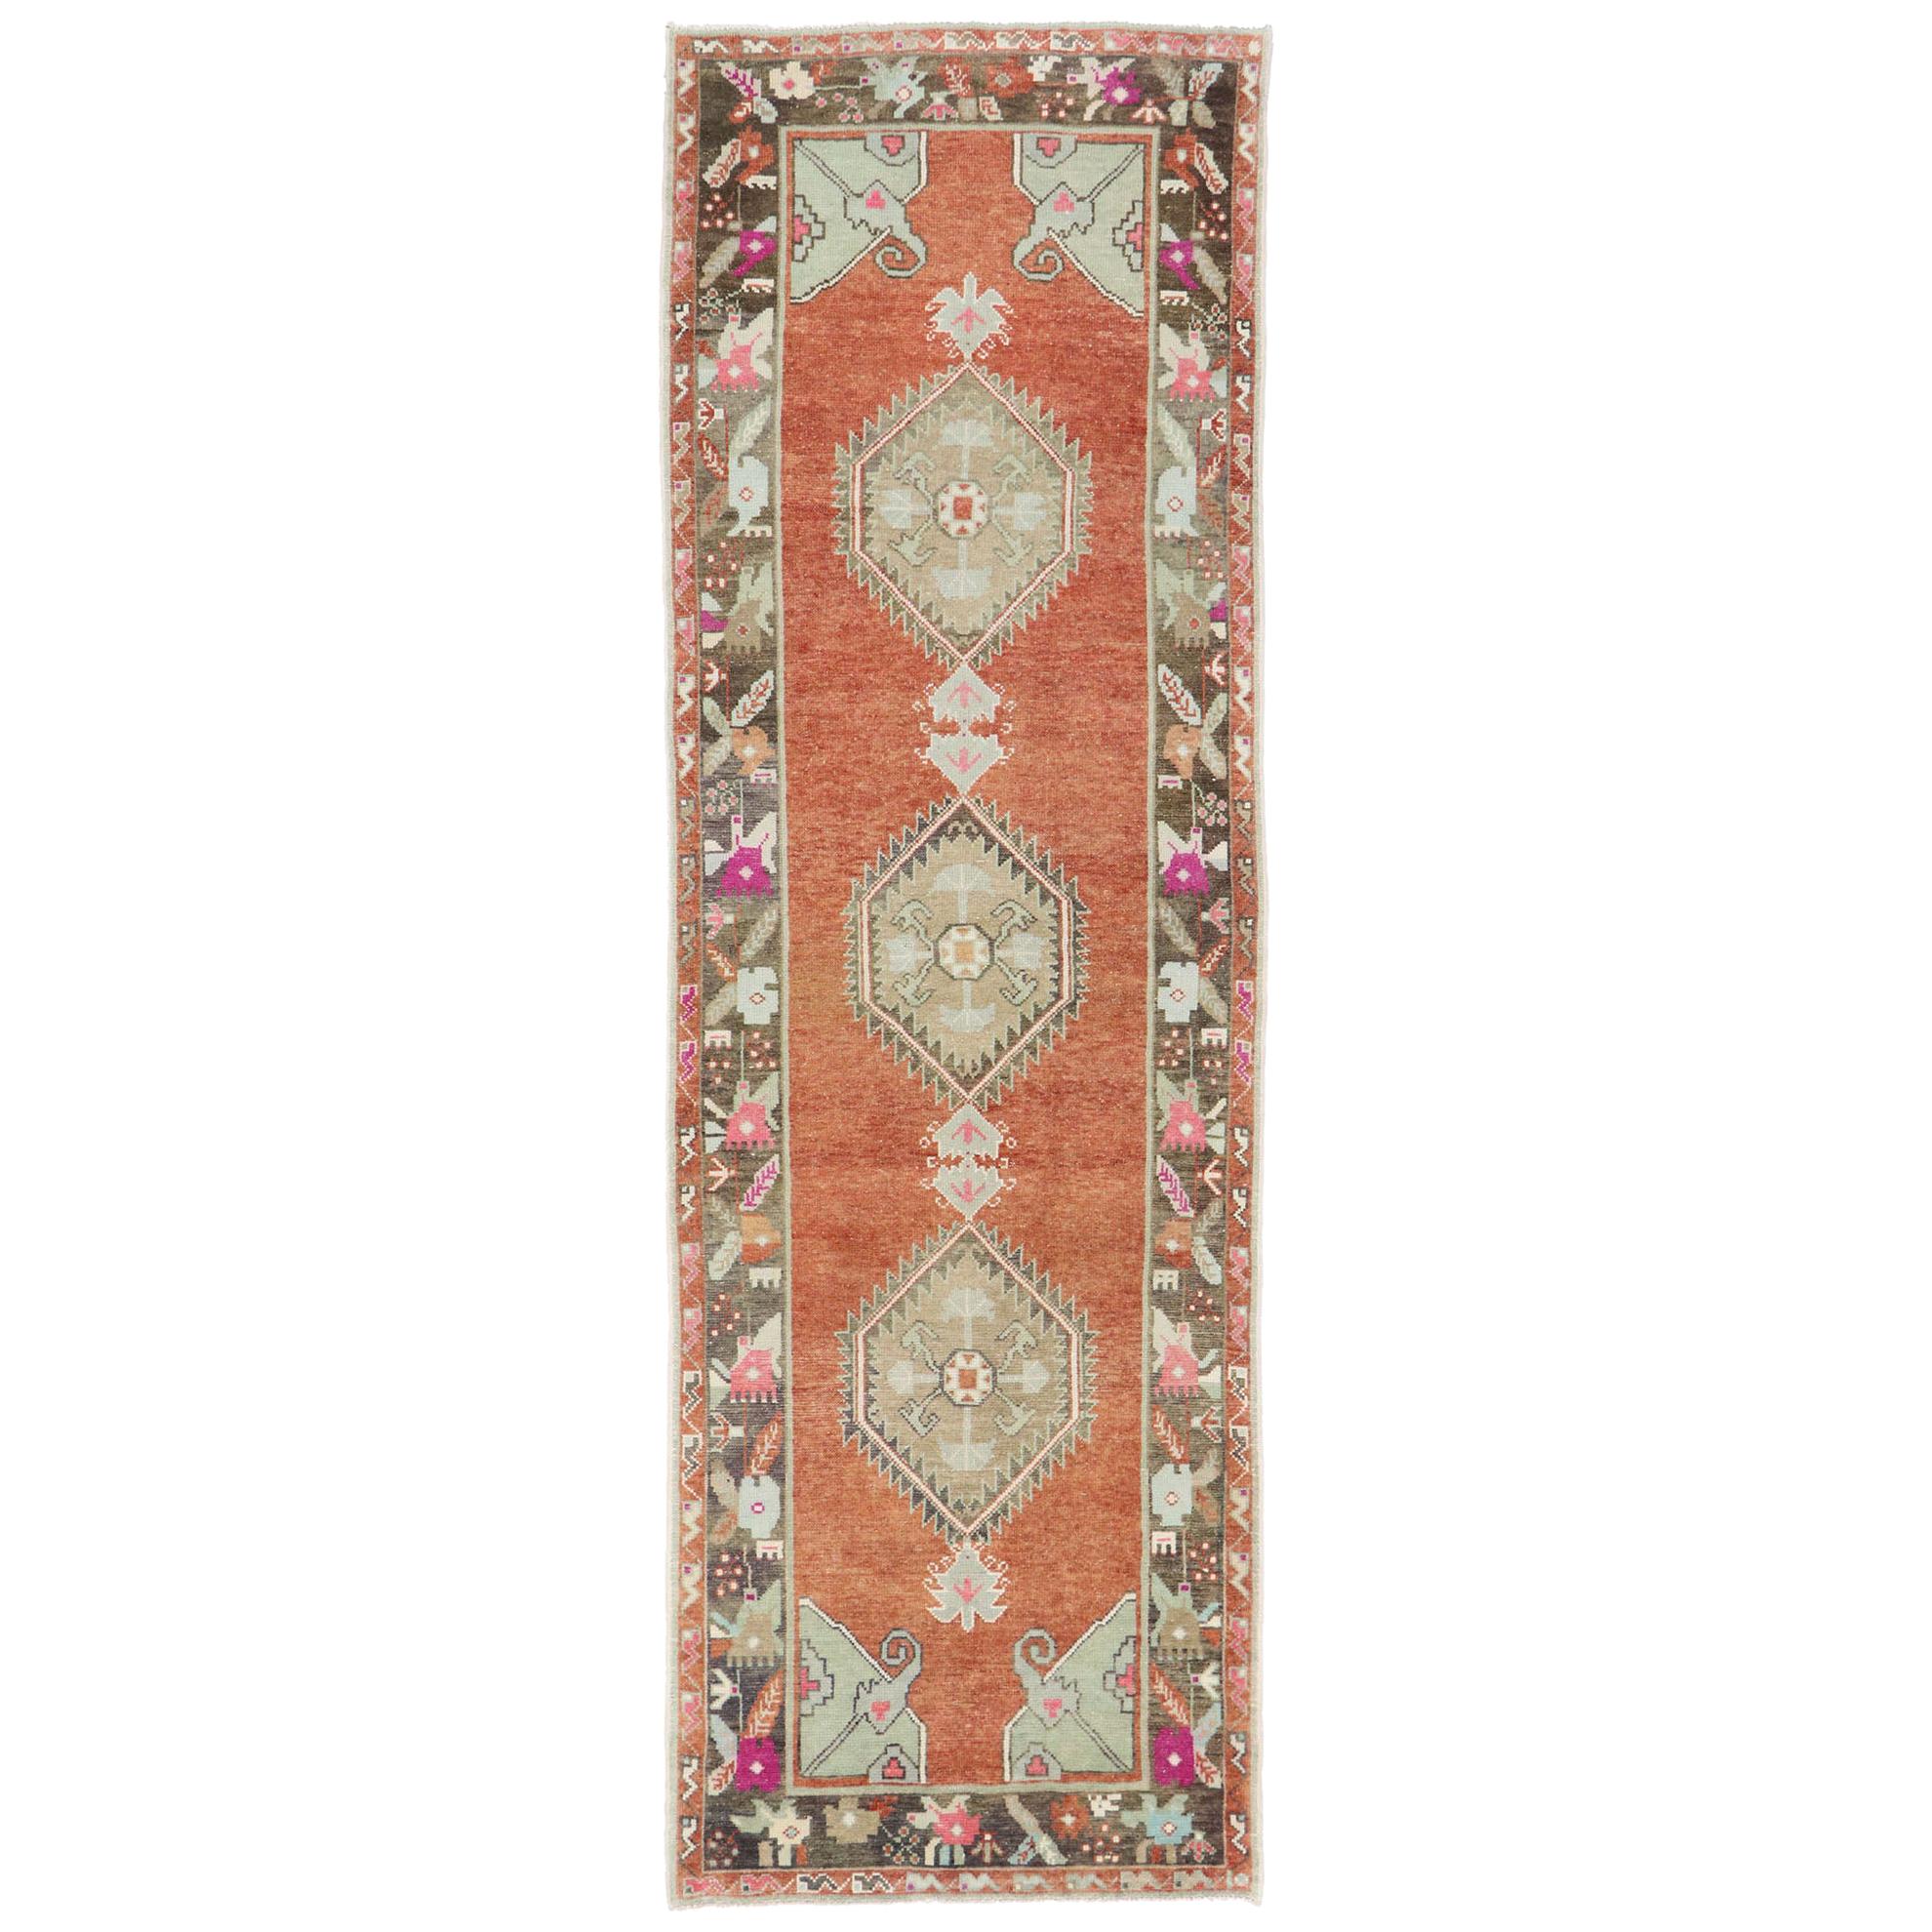 Vintage Turkish Oushak Runner with Rustic English Cottage Style